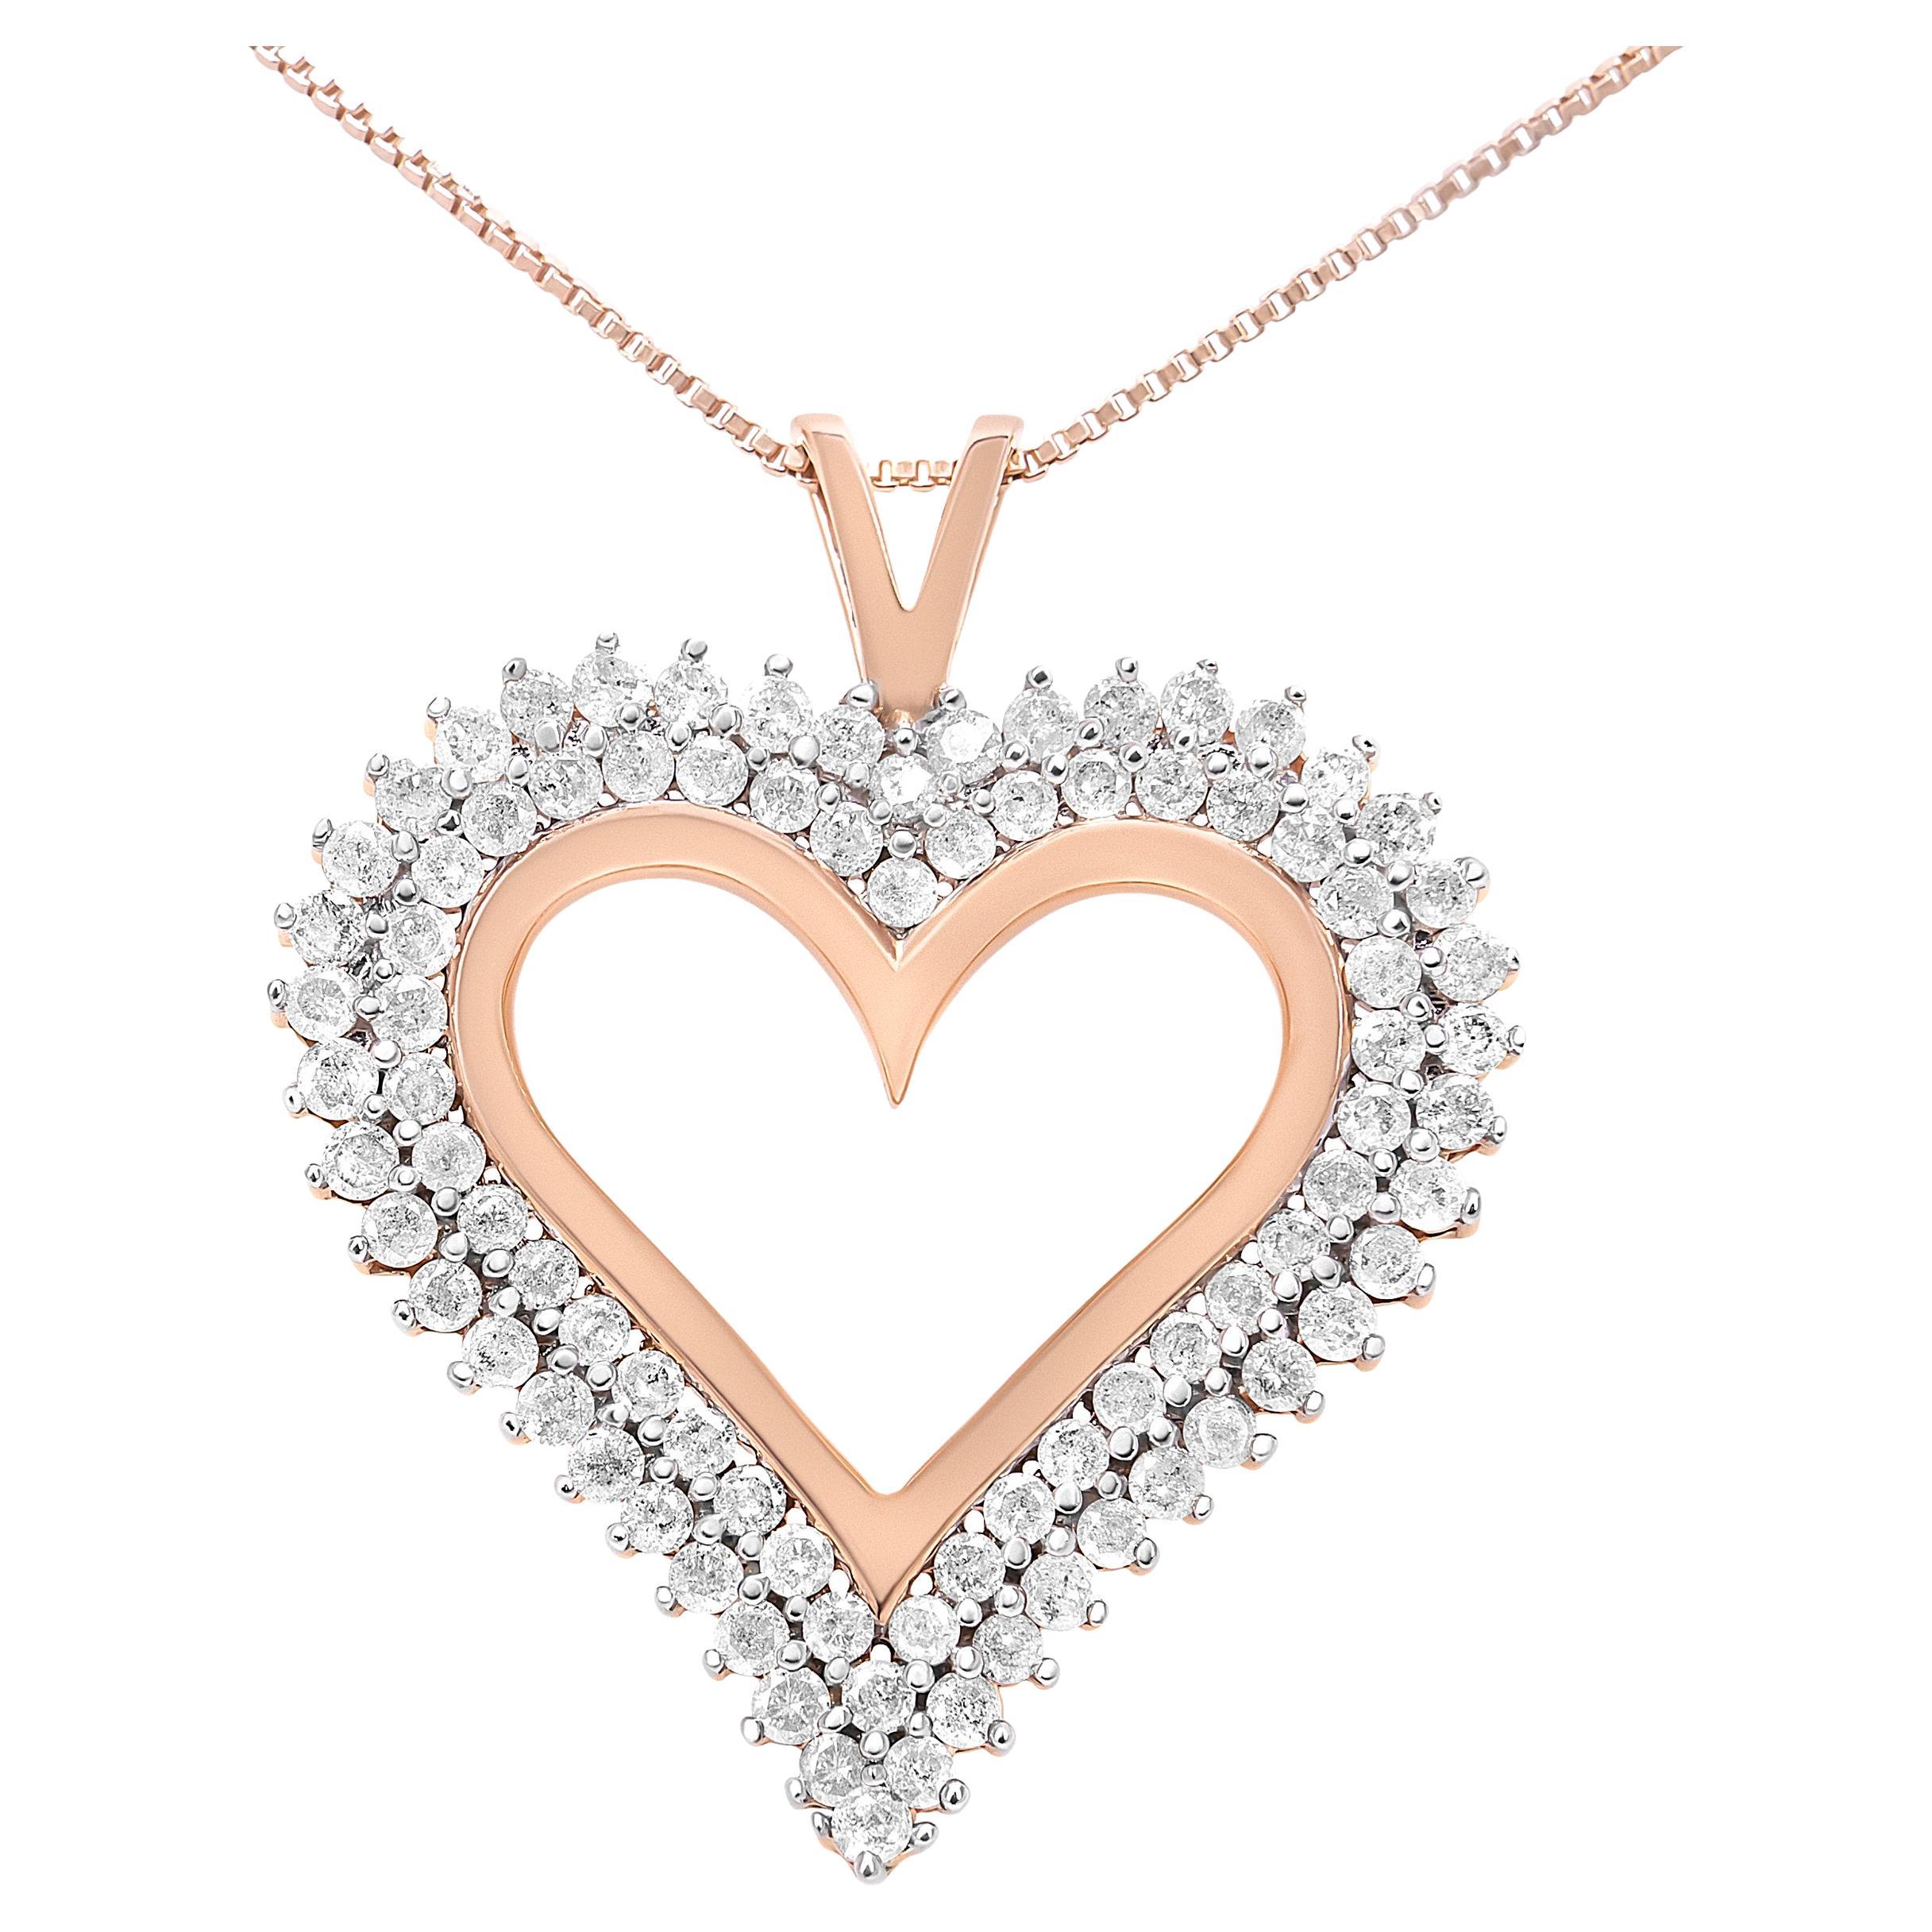 10K Rose Gold Plated Sterling Silver 3.0 Carat Diamond Heart Pendant Necklace